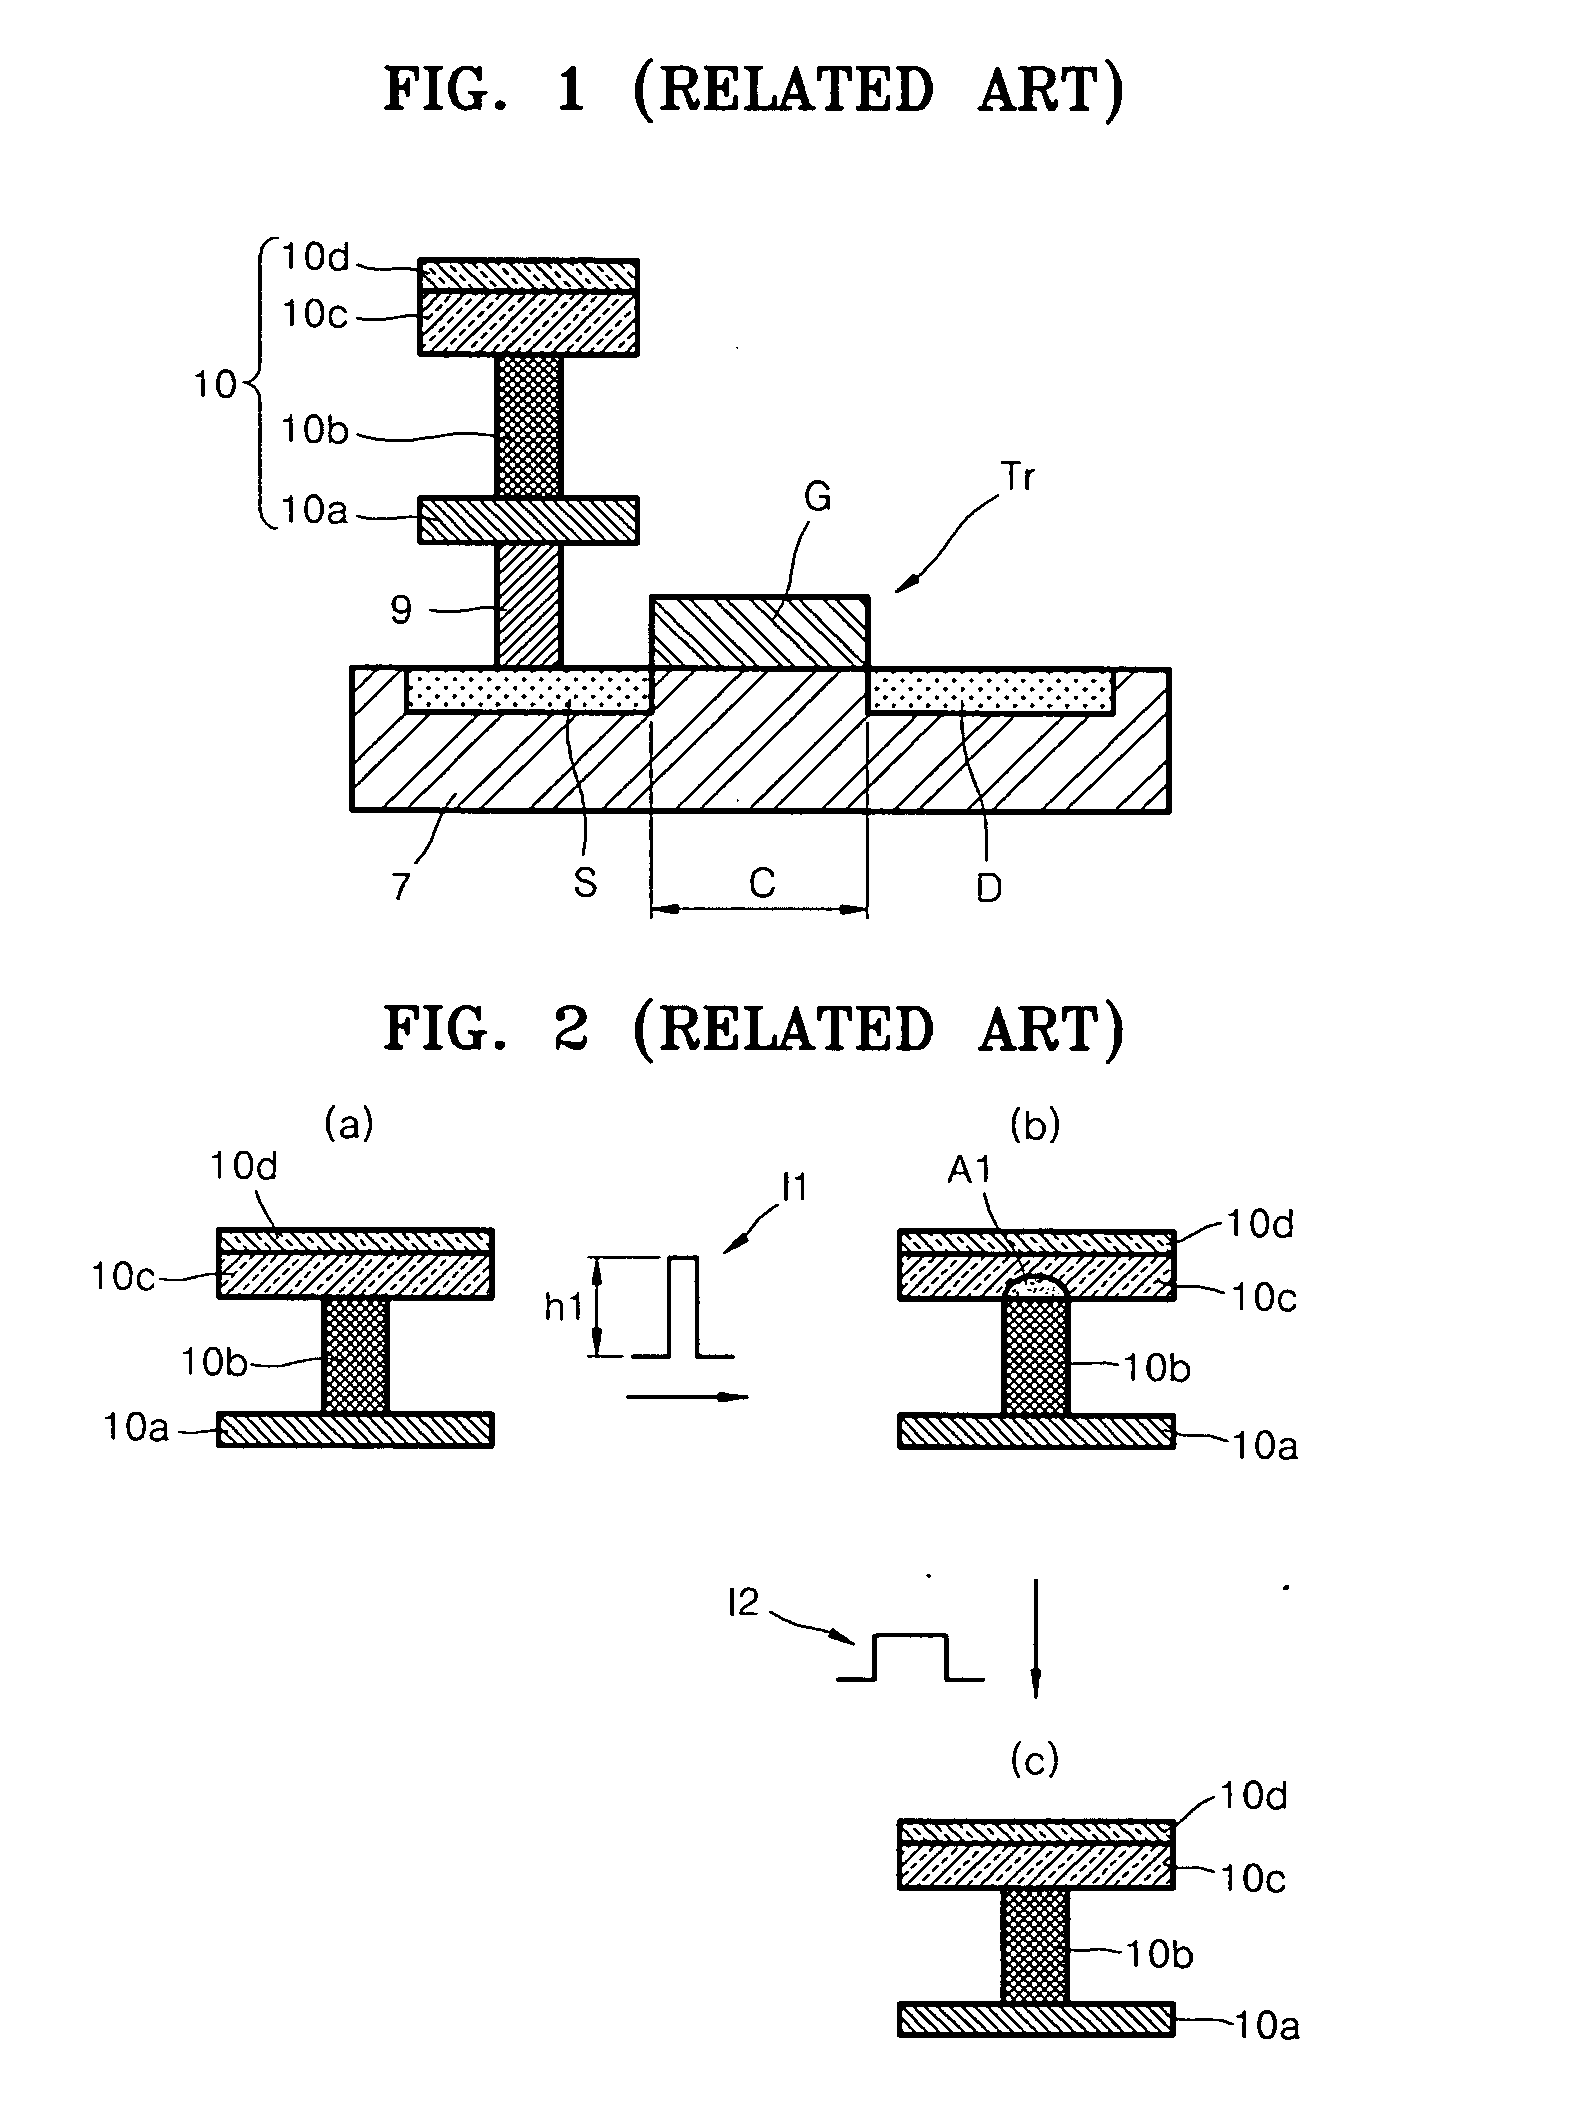 Storage node, phase change memory device and methods of operating and fabricating the same